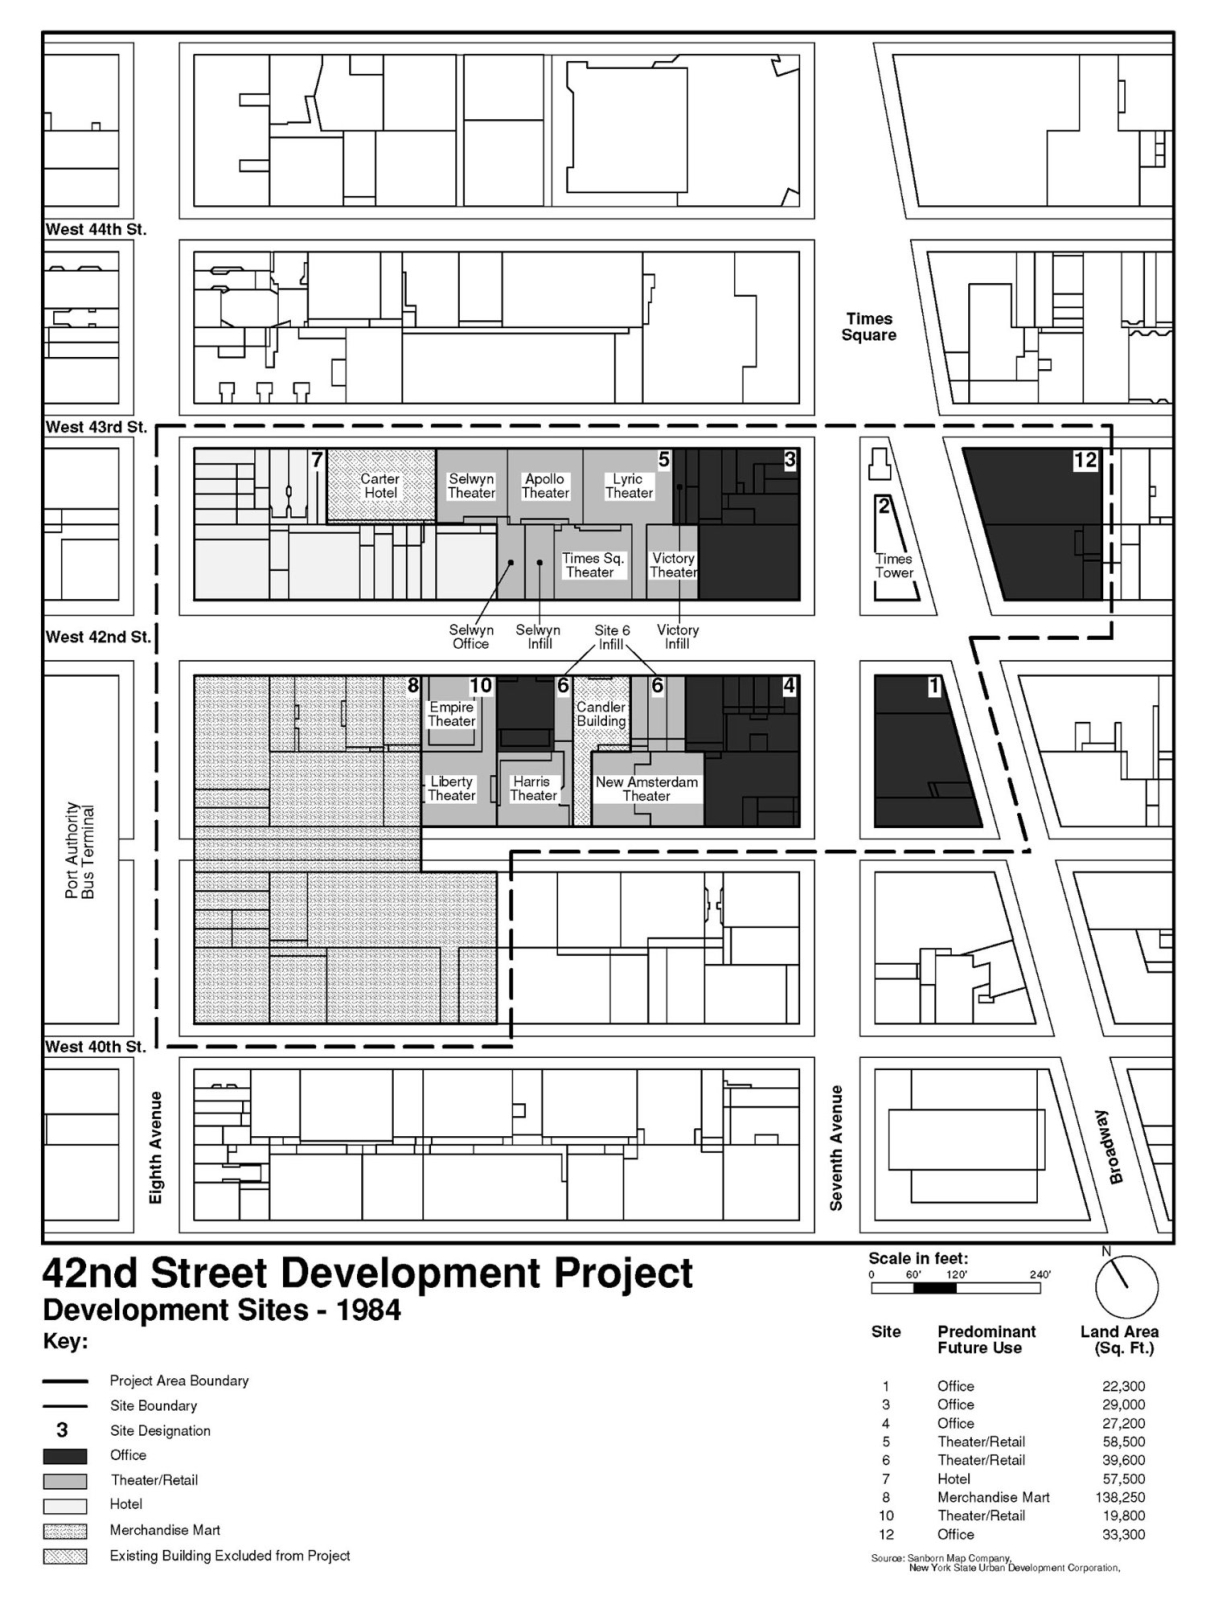 Map of the development sites for the 42nd Street Development Project.